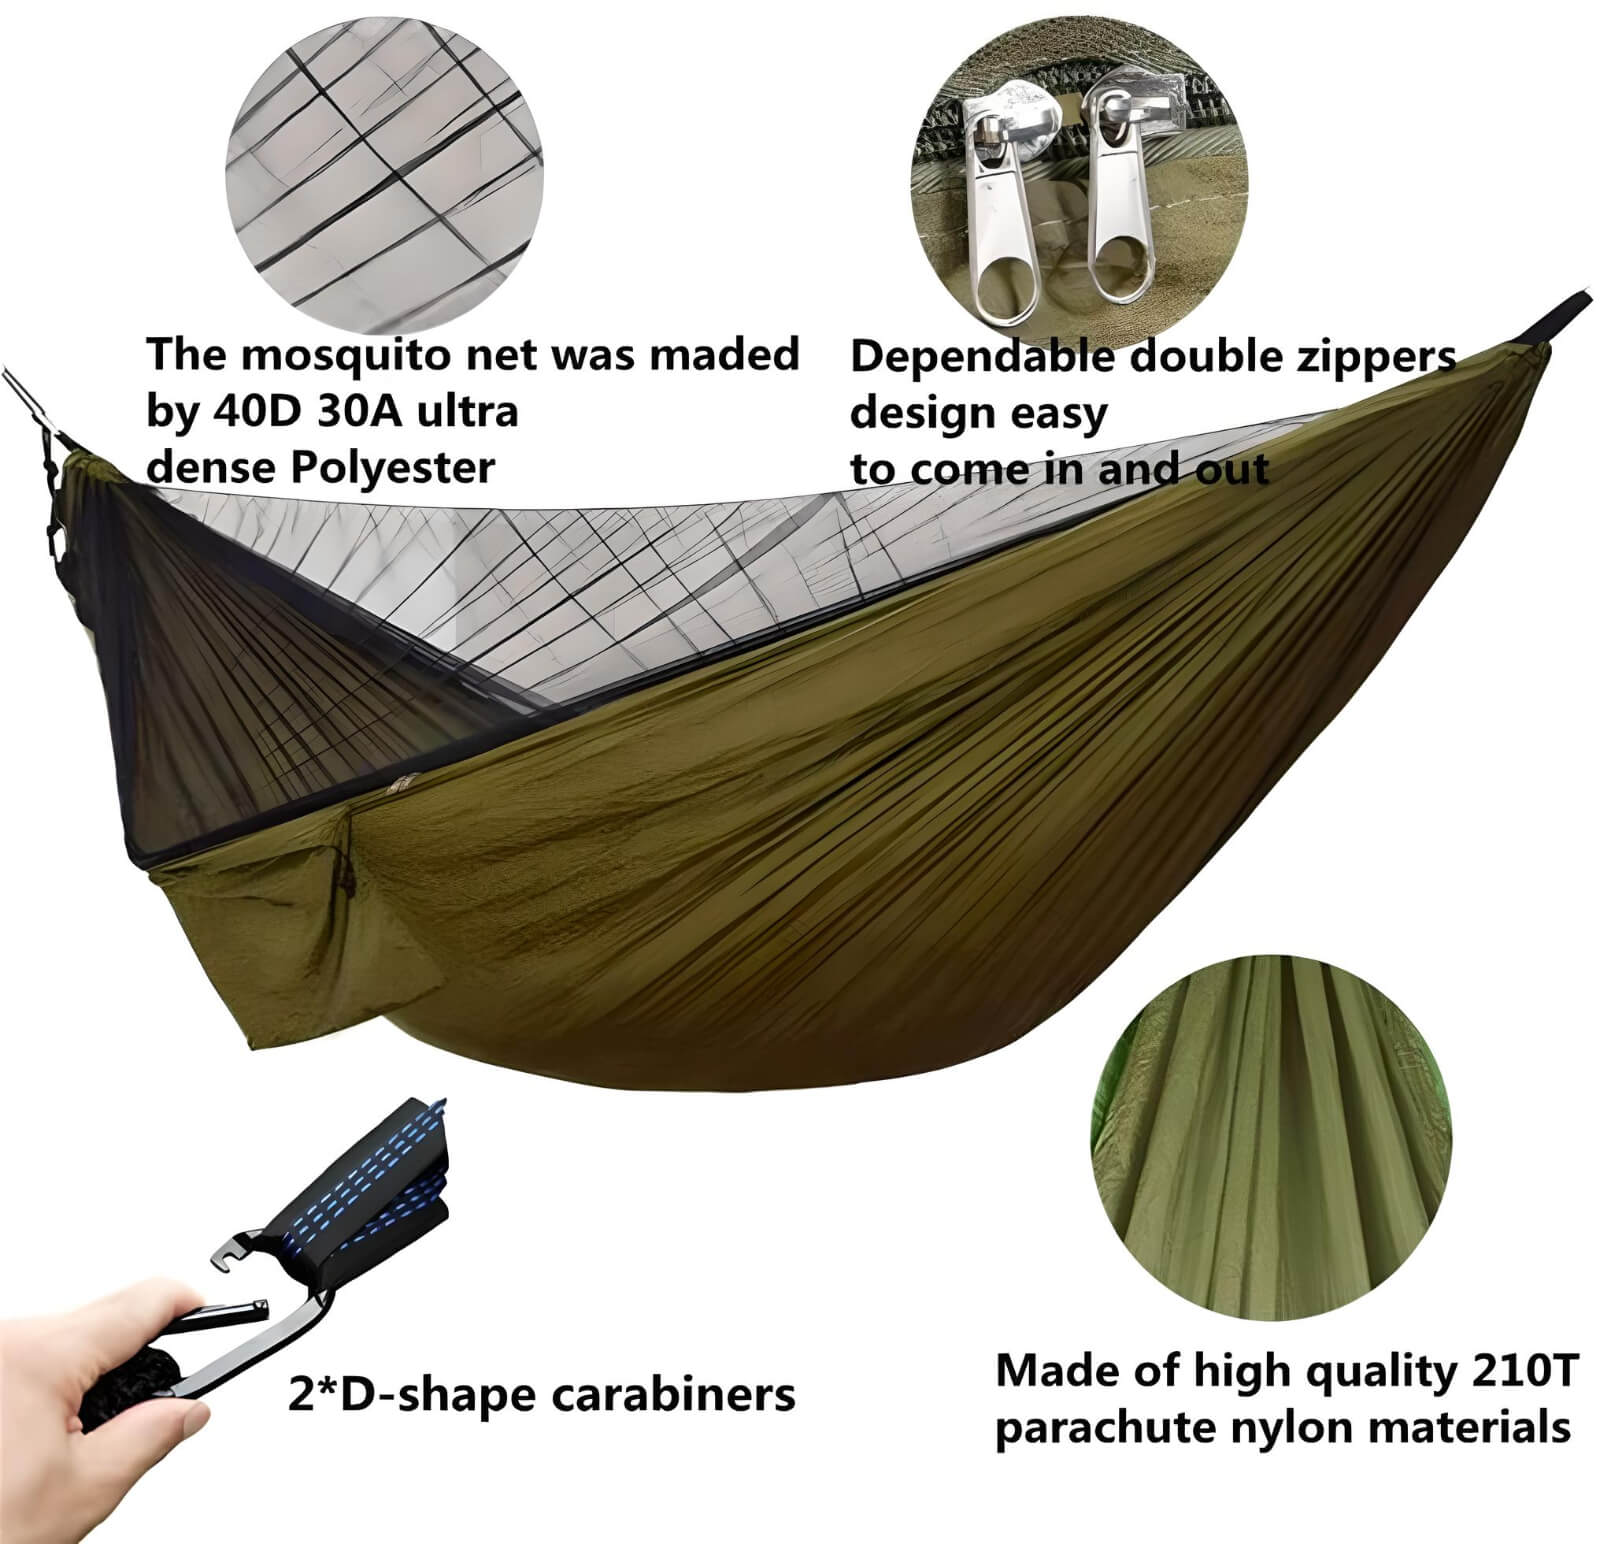 hammock-with-mosquito-net-tent-material-detail